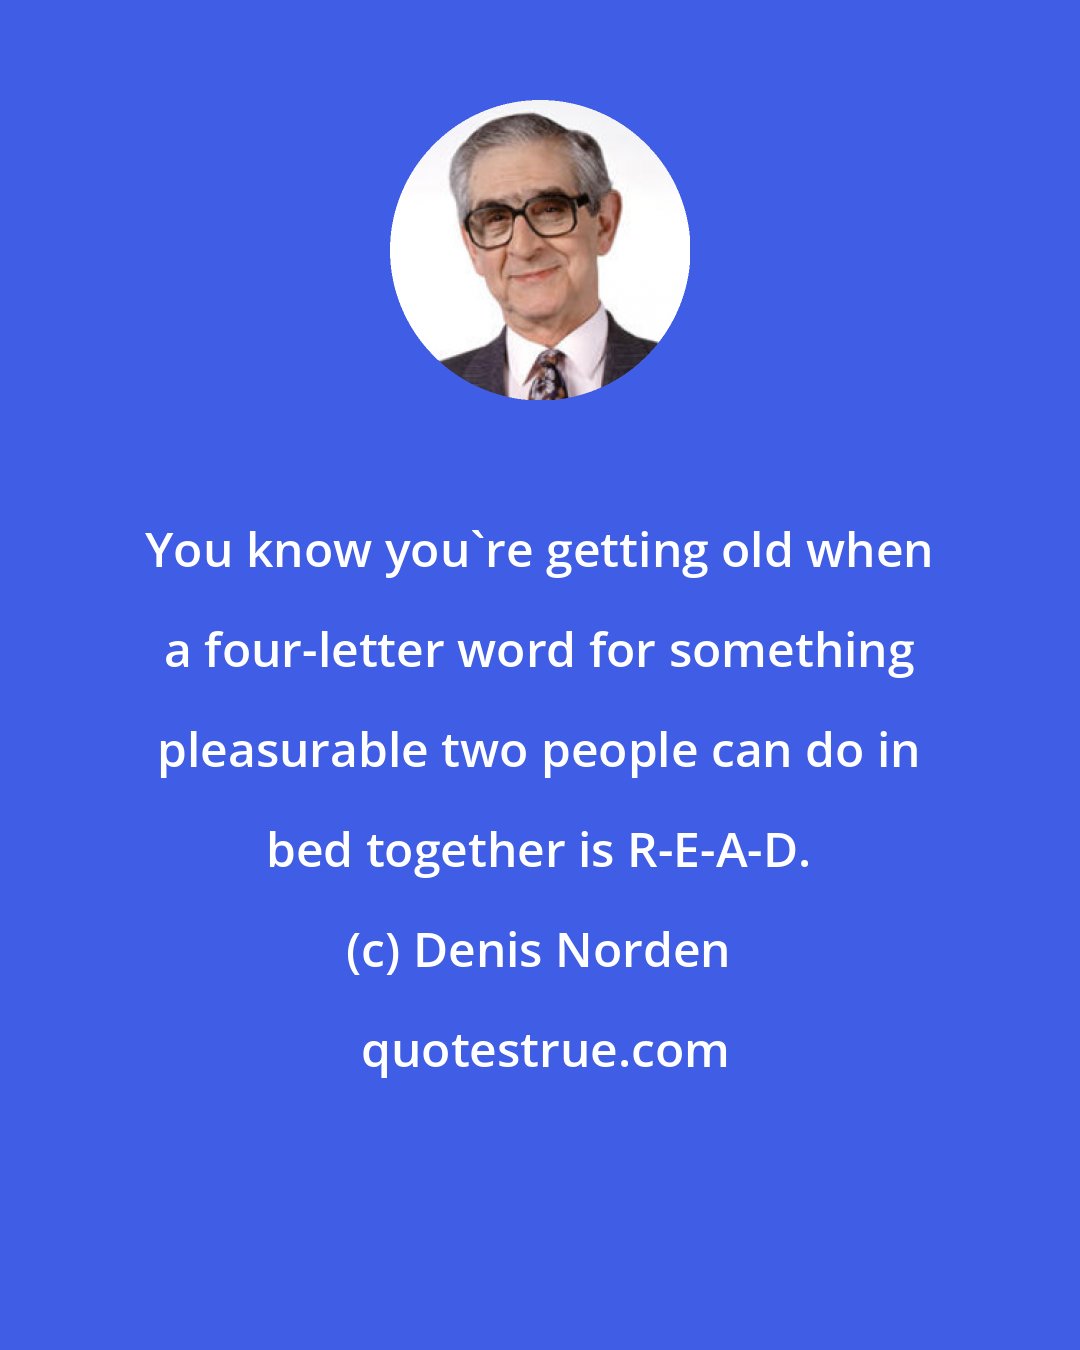 Denis Norden: You know you're getting old when a four-letter word for something pleasurable two people can do in bed together is R-E-A-D.